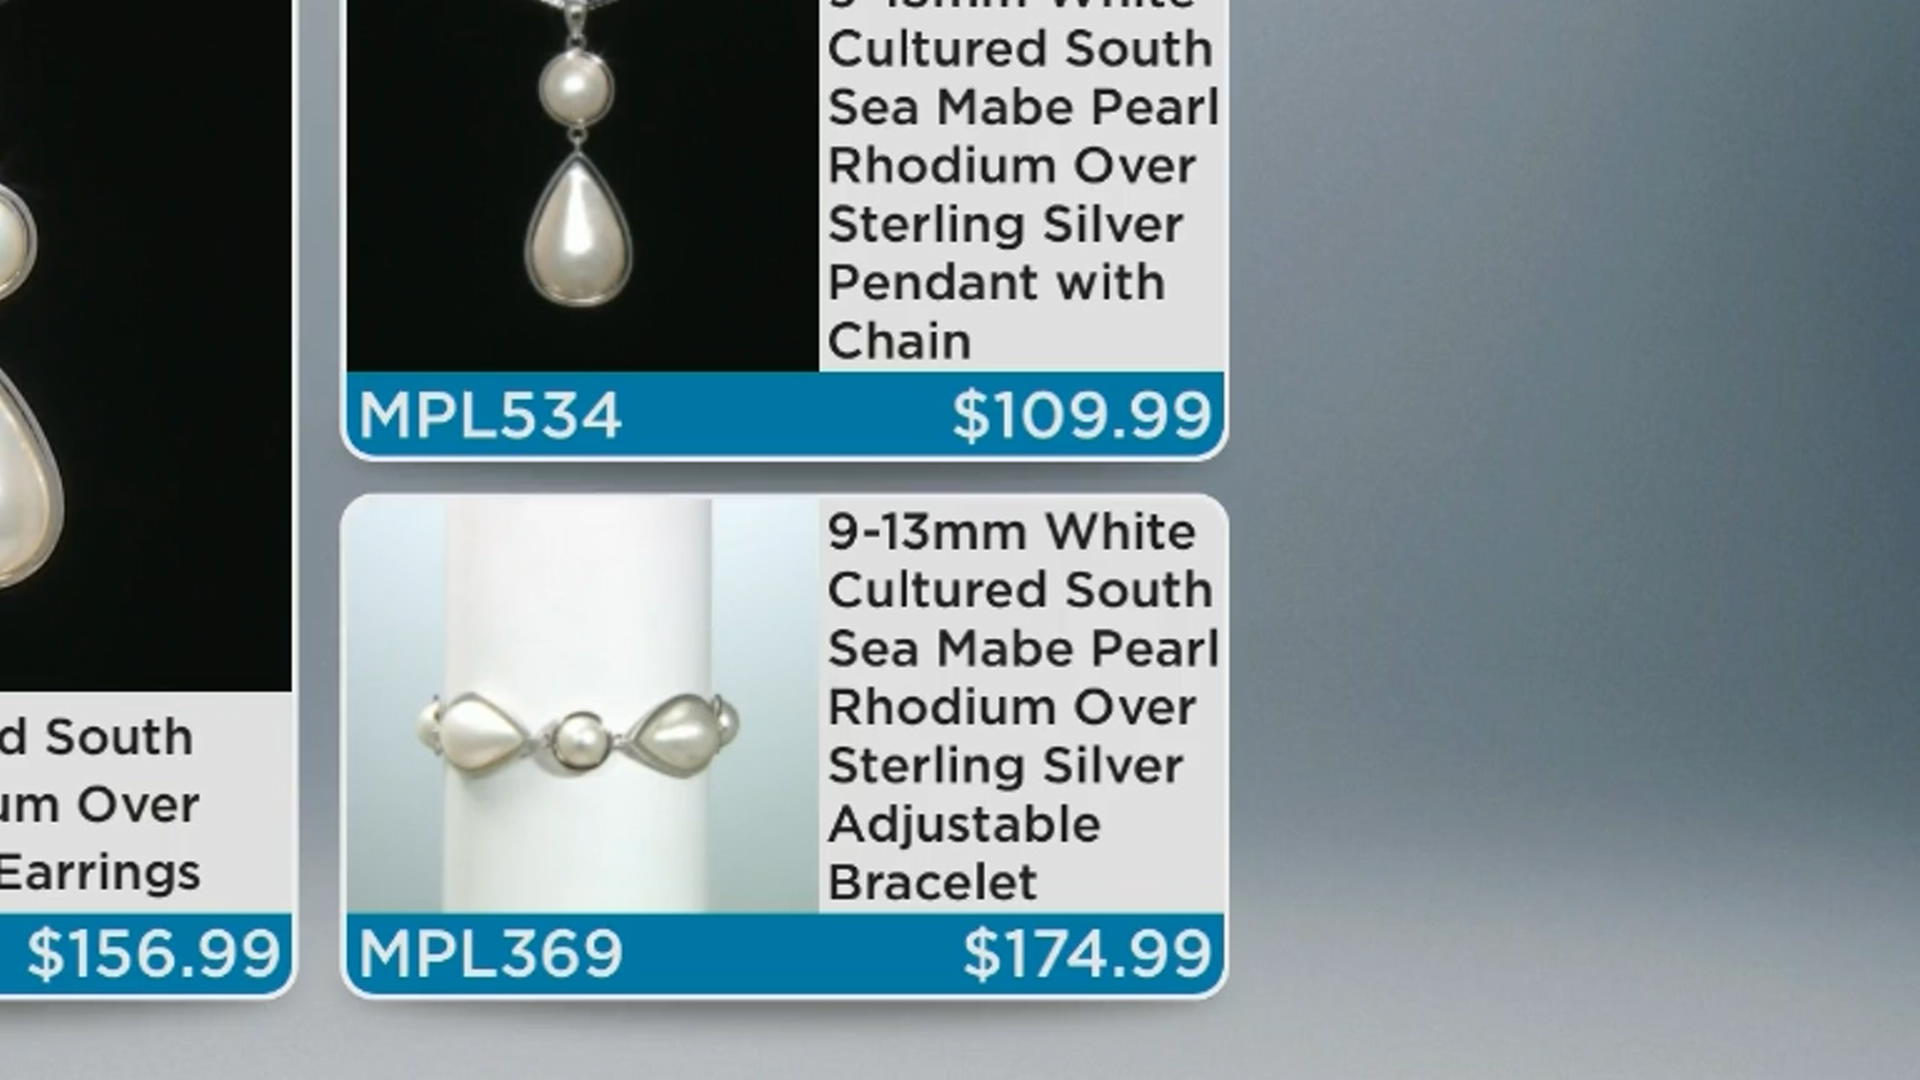 White Cultured South Sea Mabe Pearl Rhodium Over Sterling Silver Pendant With Chain Video Thumbnail